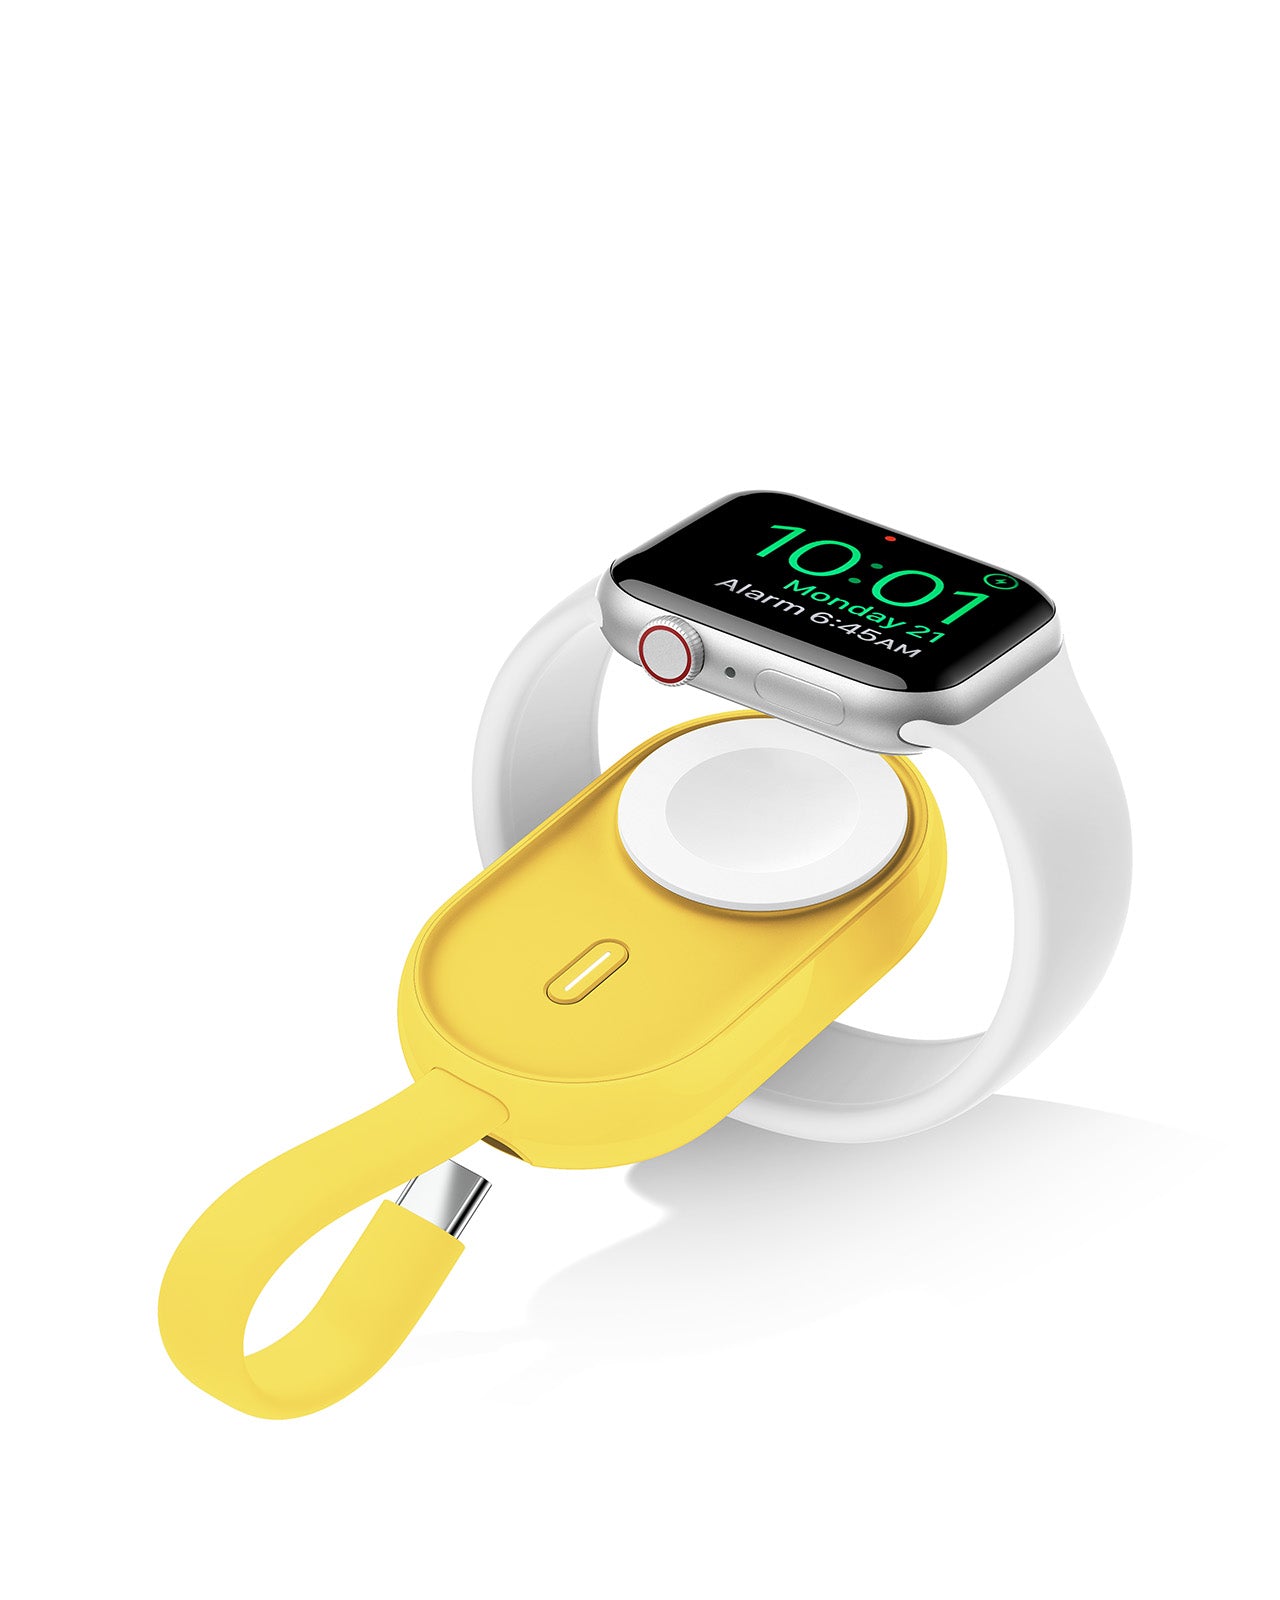 W0102 Super Mini Wireless Charger for Apple Watch, 1200mAh Watch Battery Pack with Input Cable